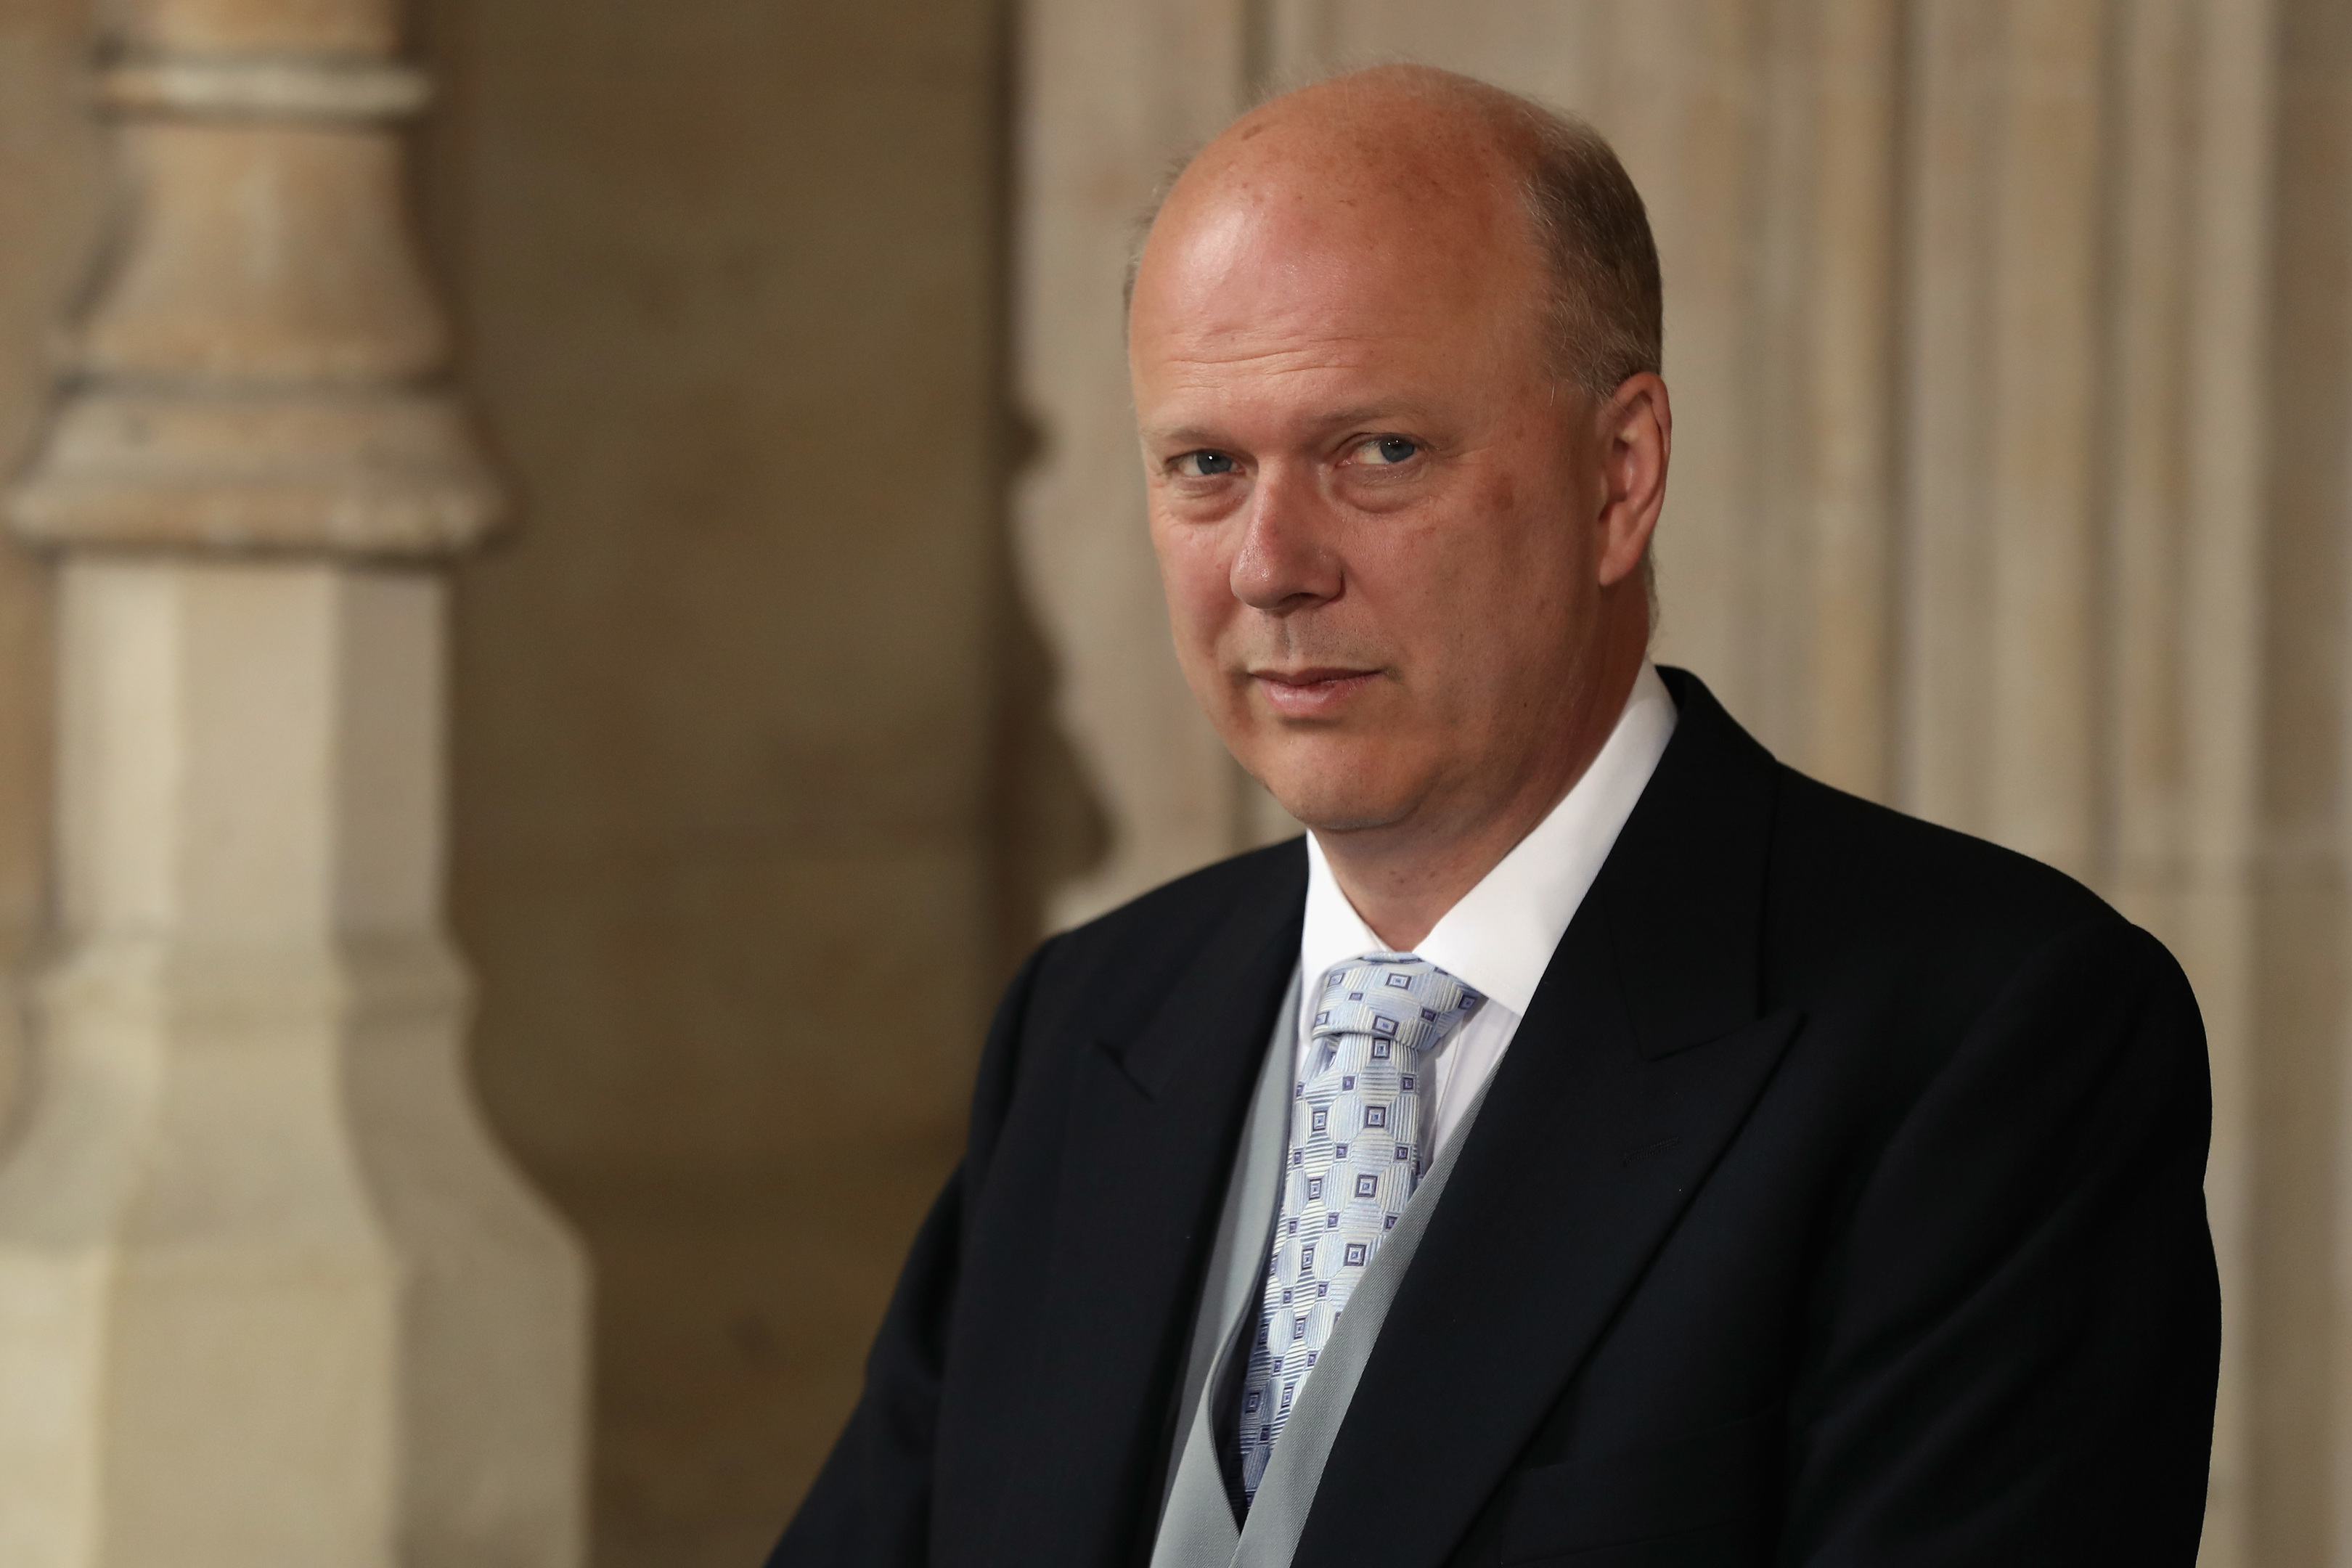 Leader of the House of Commons Chris Grayling alluded to the scandal during a debate on the EU referendum debate.